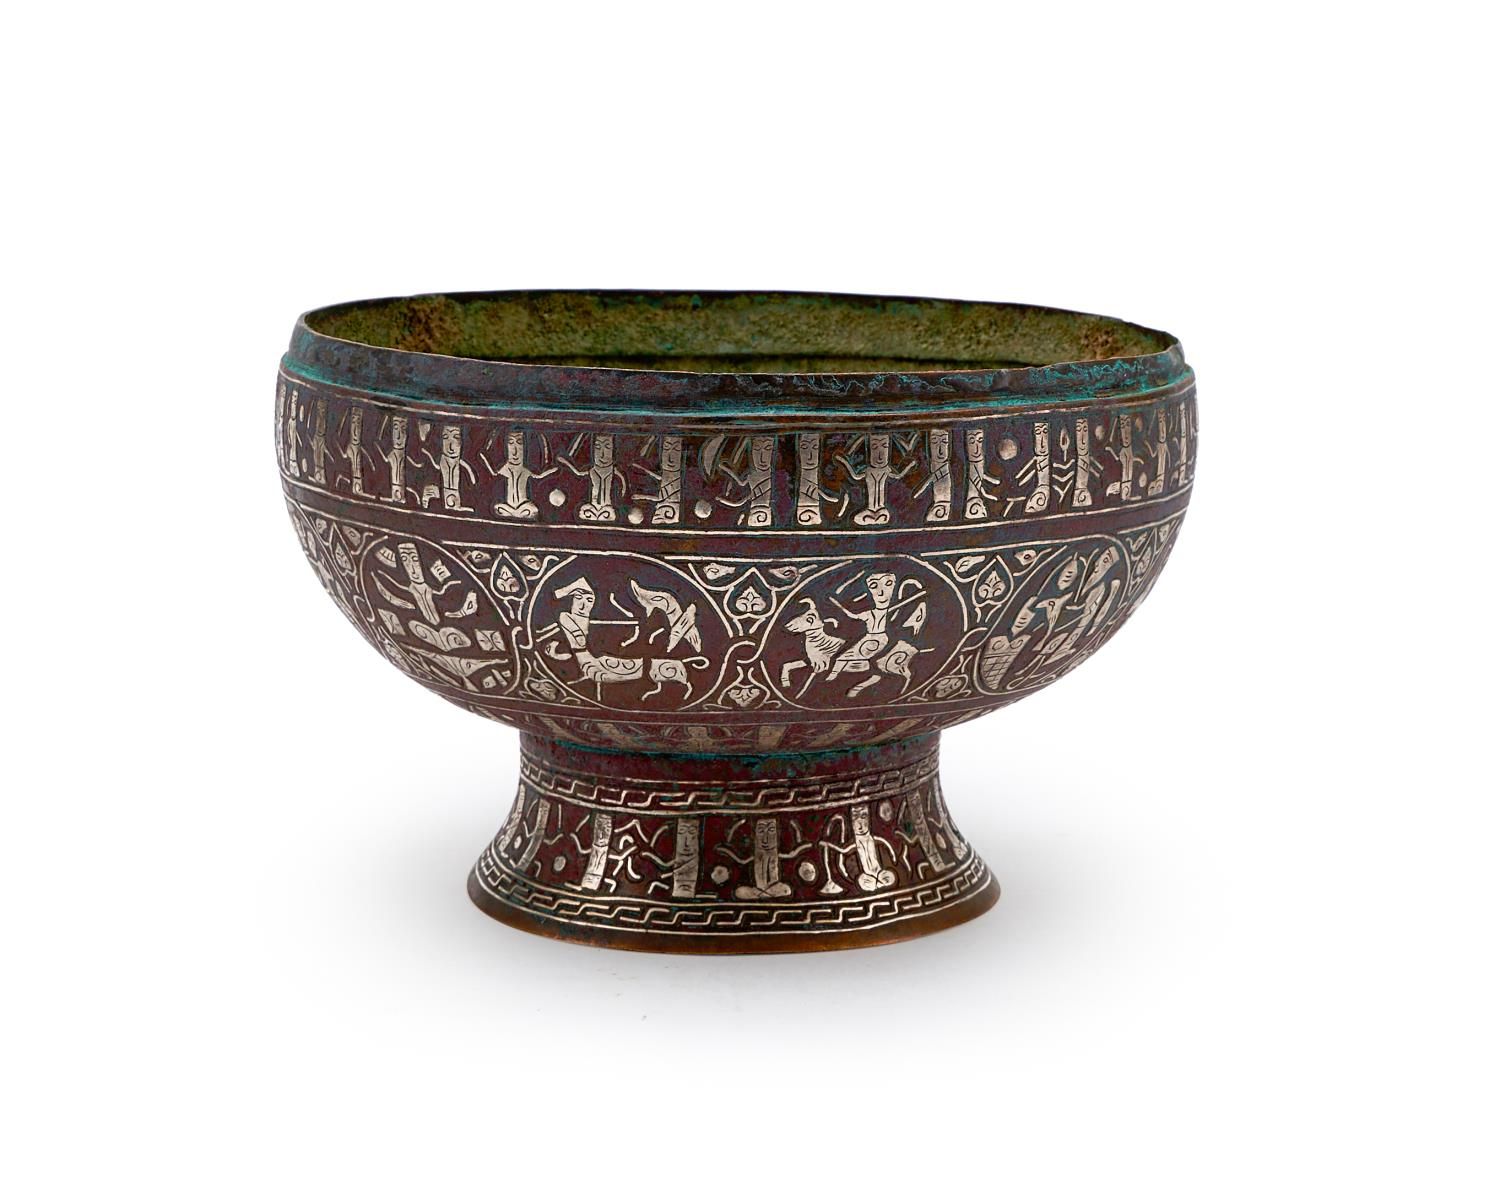 A SILVER-INLAID WHITE BRONZE FOOTED BOWL, IRAN, PROBABLY KHORASSAN, EARLY 13TH C&hellip;